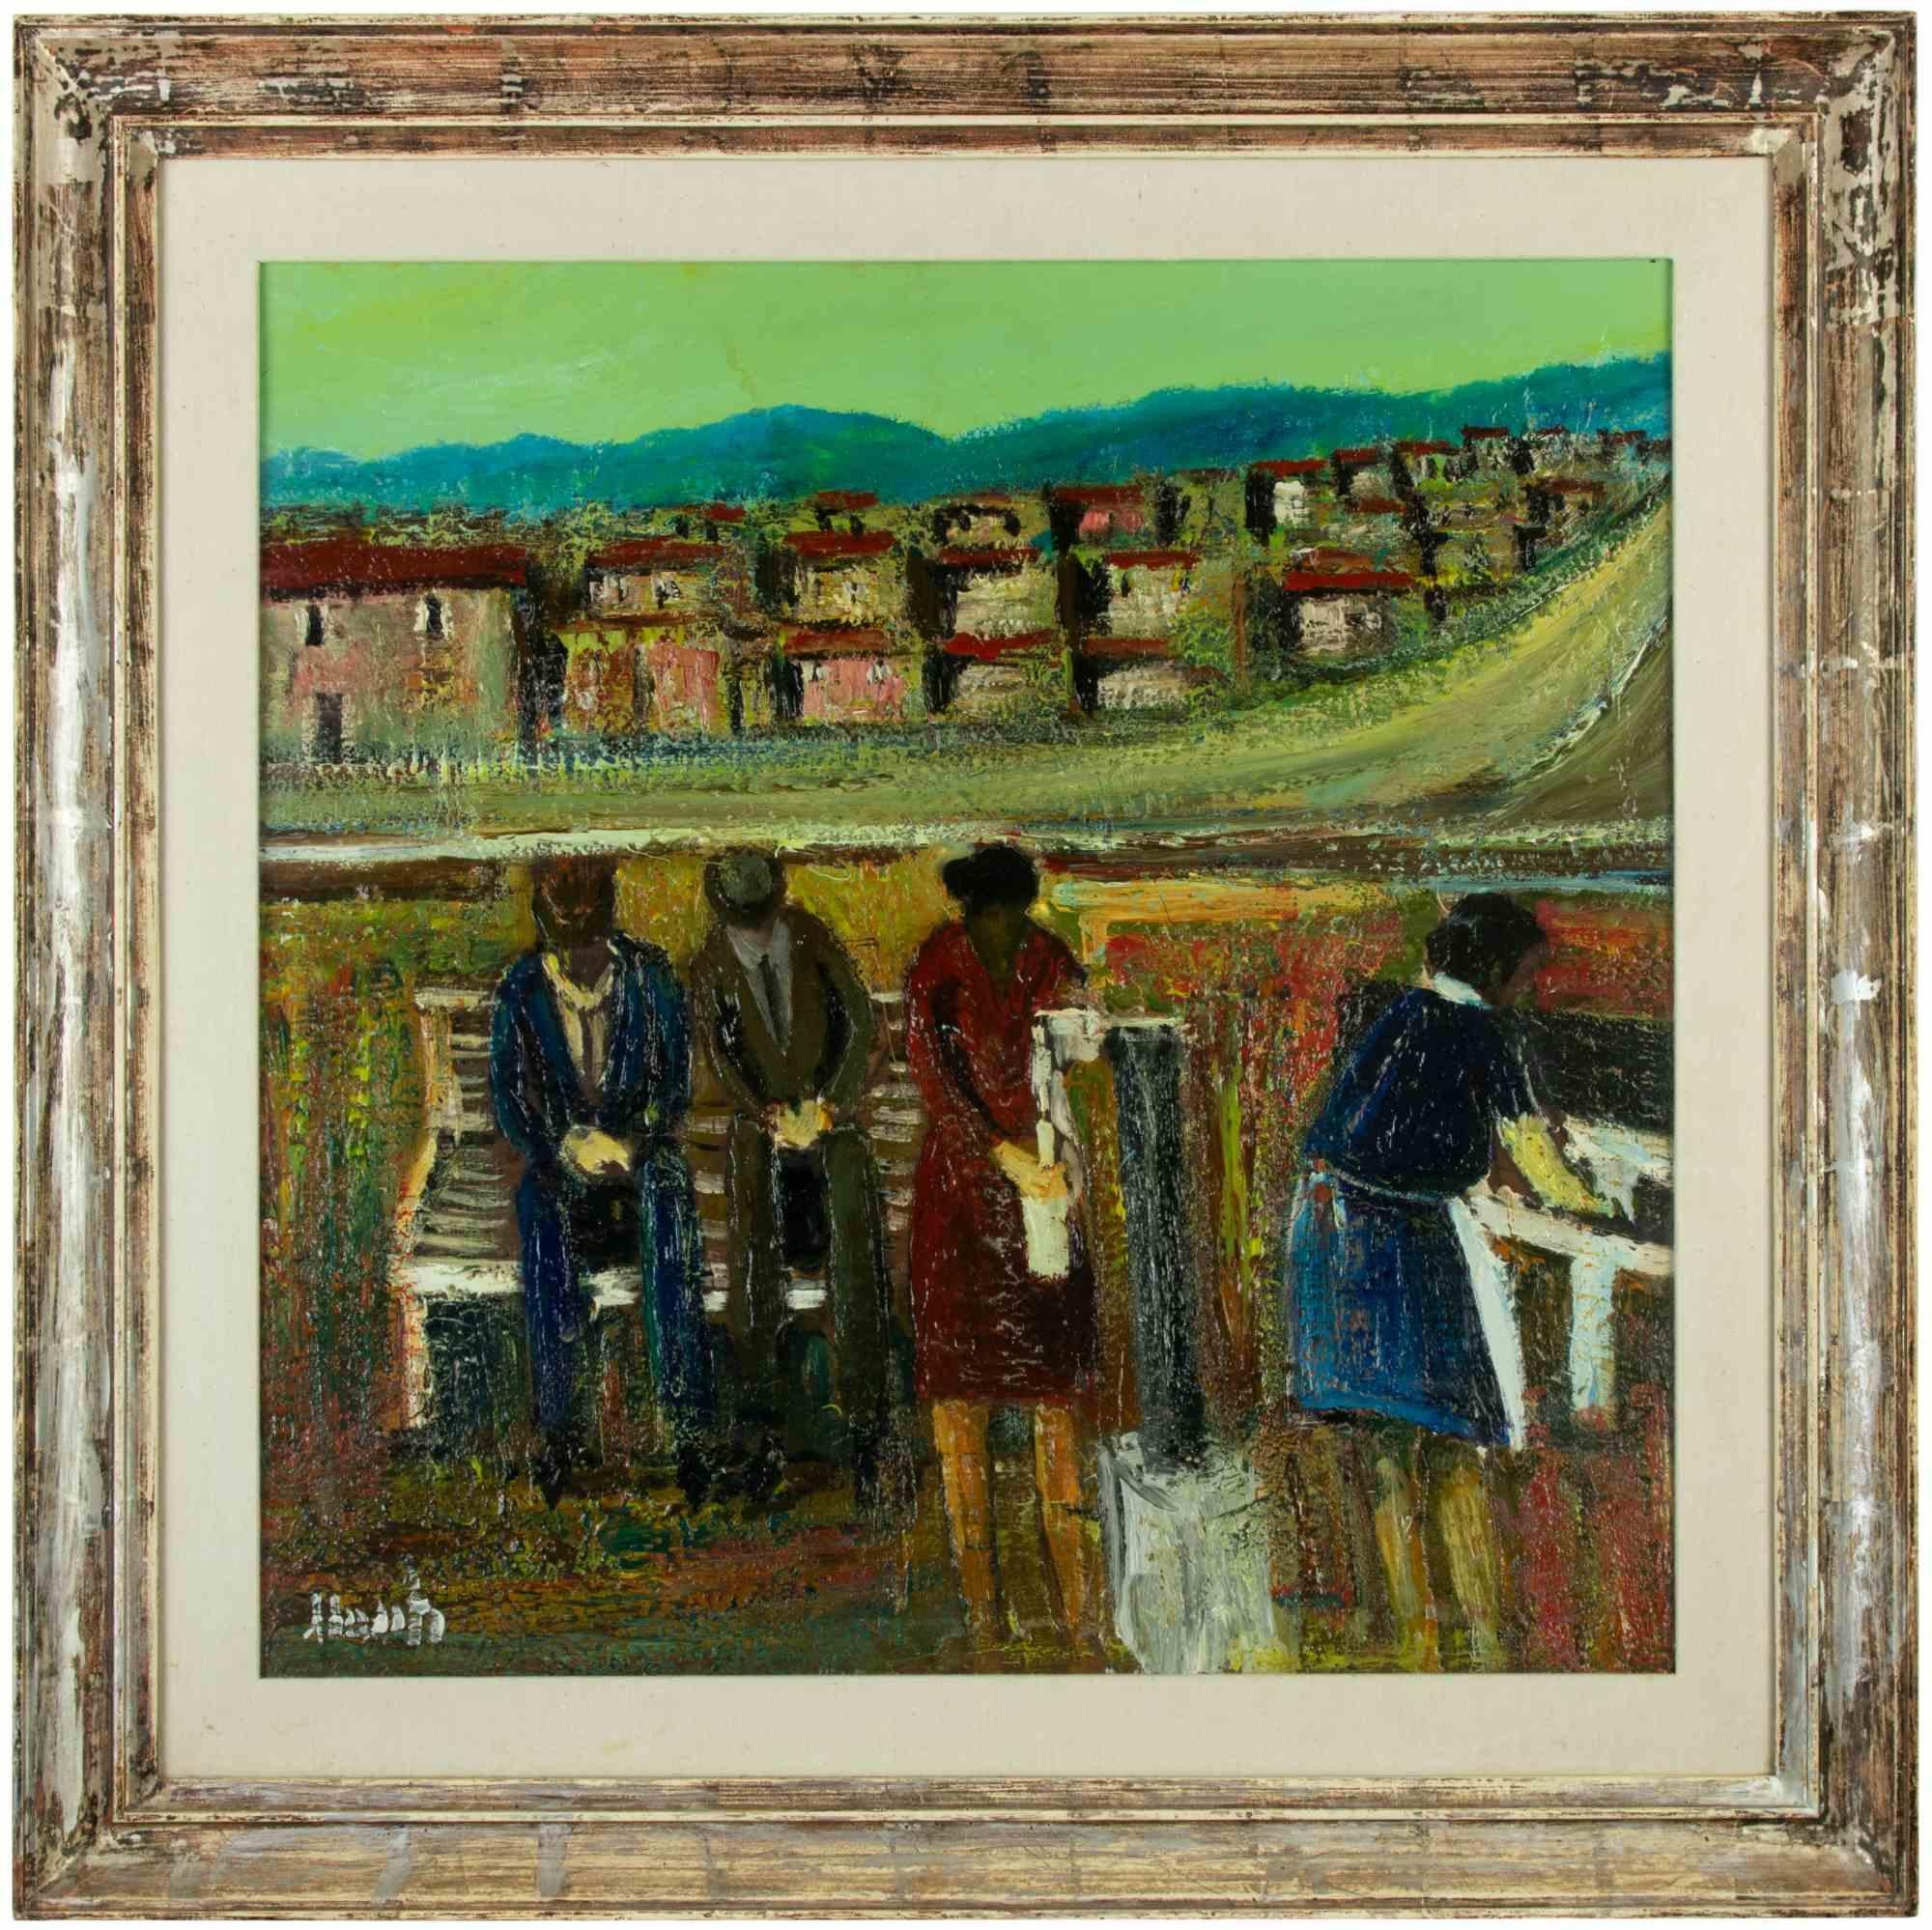 Roman Castles. Stopover near Marino is an artwork realized by Mario Monti in 1979.

Acrylic on Board.

69 x 69 cm; 91.5 x 91.5 with frame. 

Handsigned in the lower right part.

Very good conditions!

 

Mario Monti was born in 1917 and was